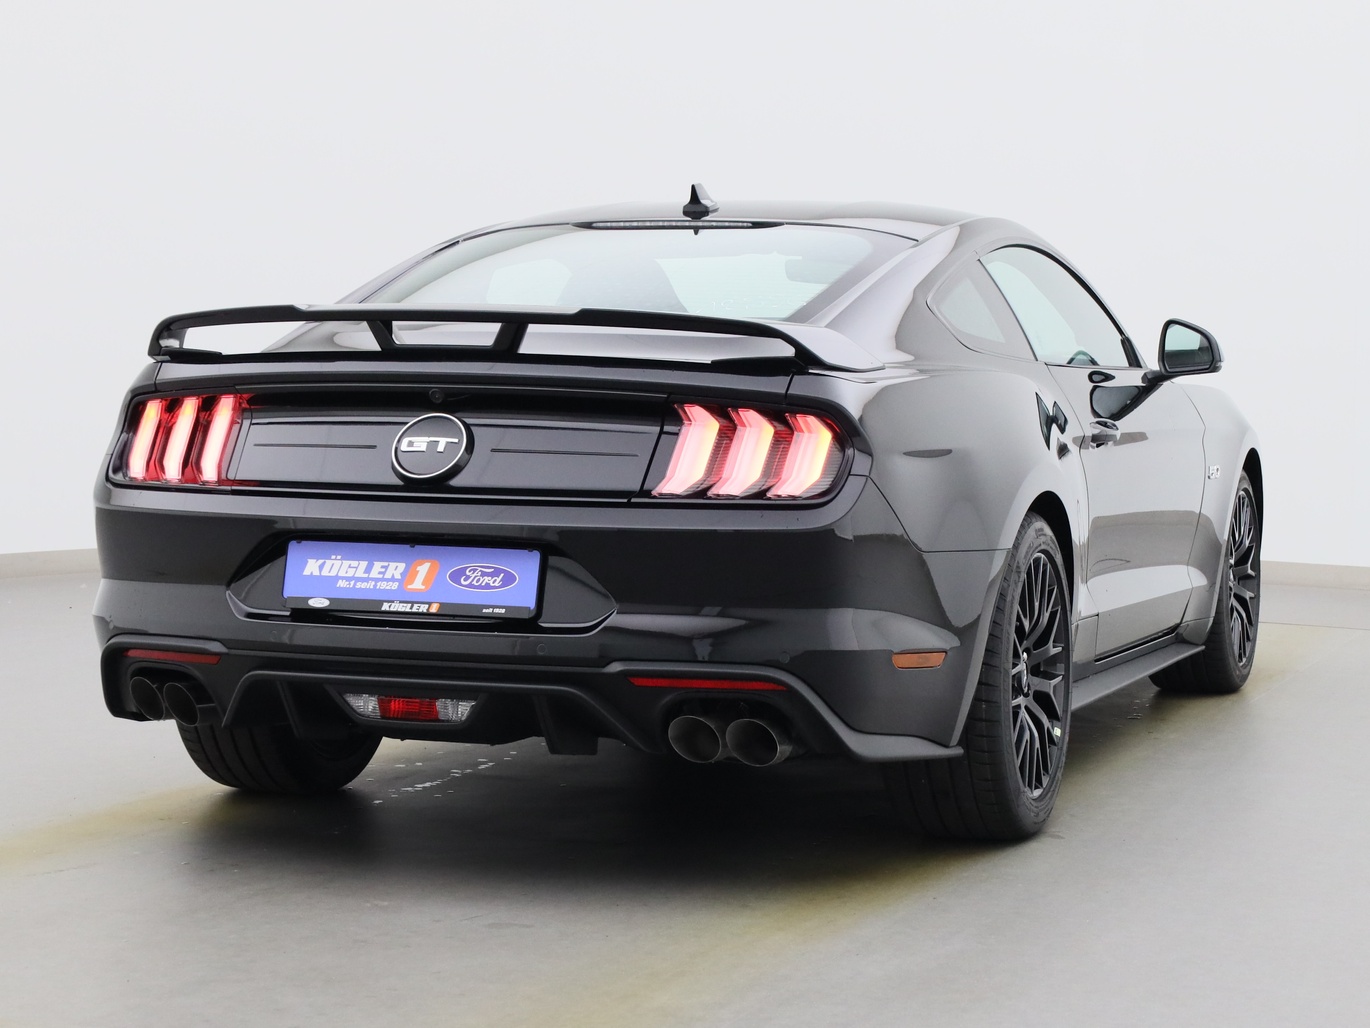  Ford Mustang GT Coupé V8 450PS / Premium 2 / Magne in Iridium Schwarz 